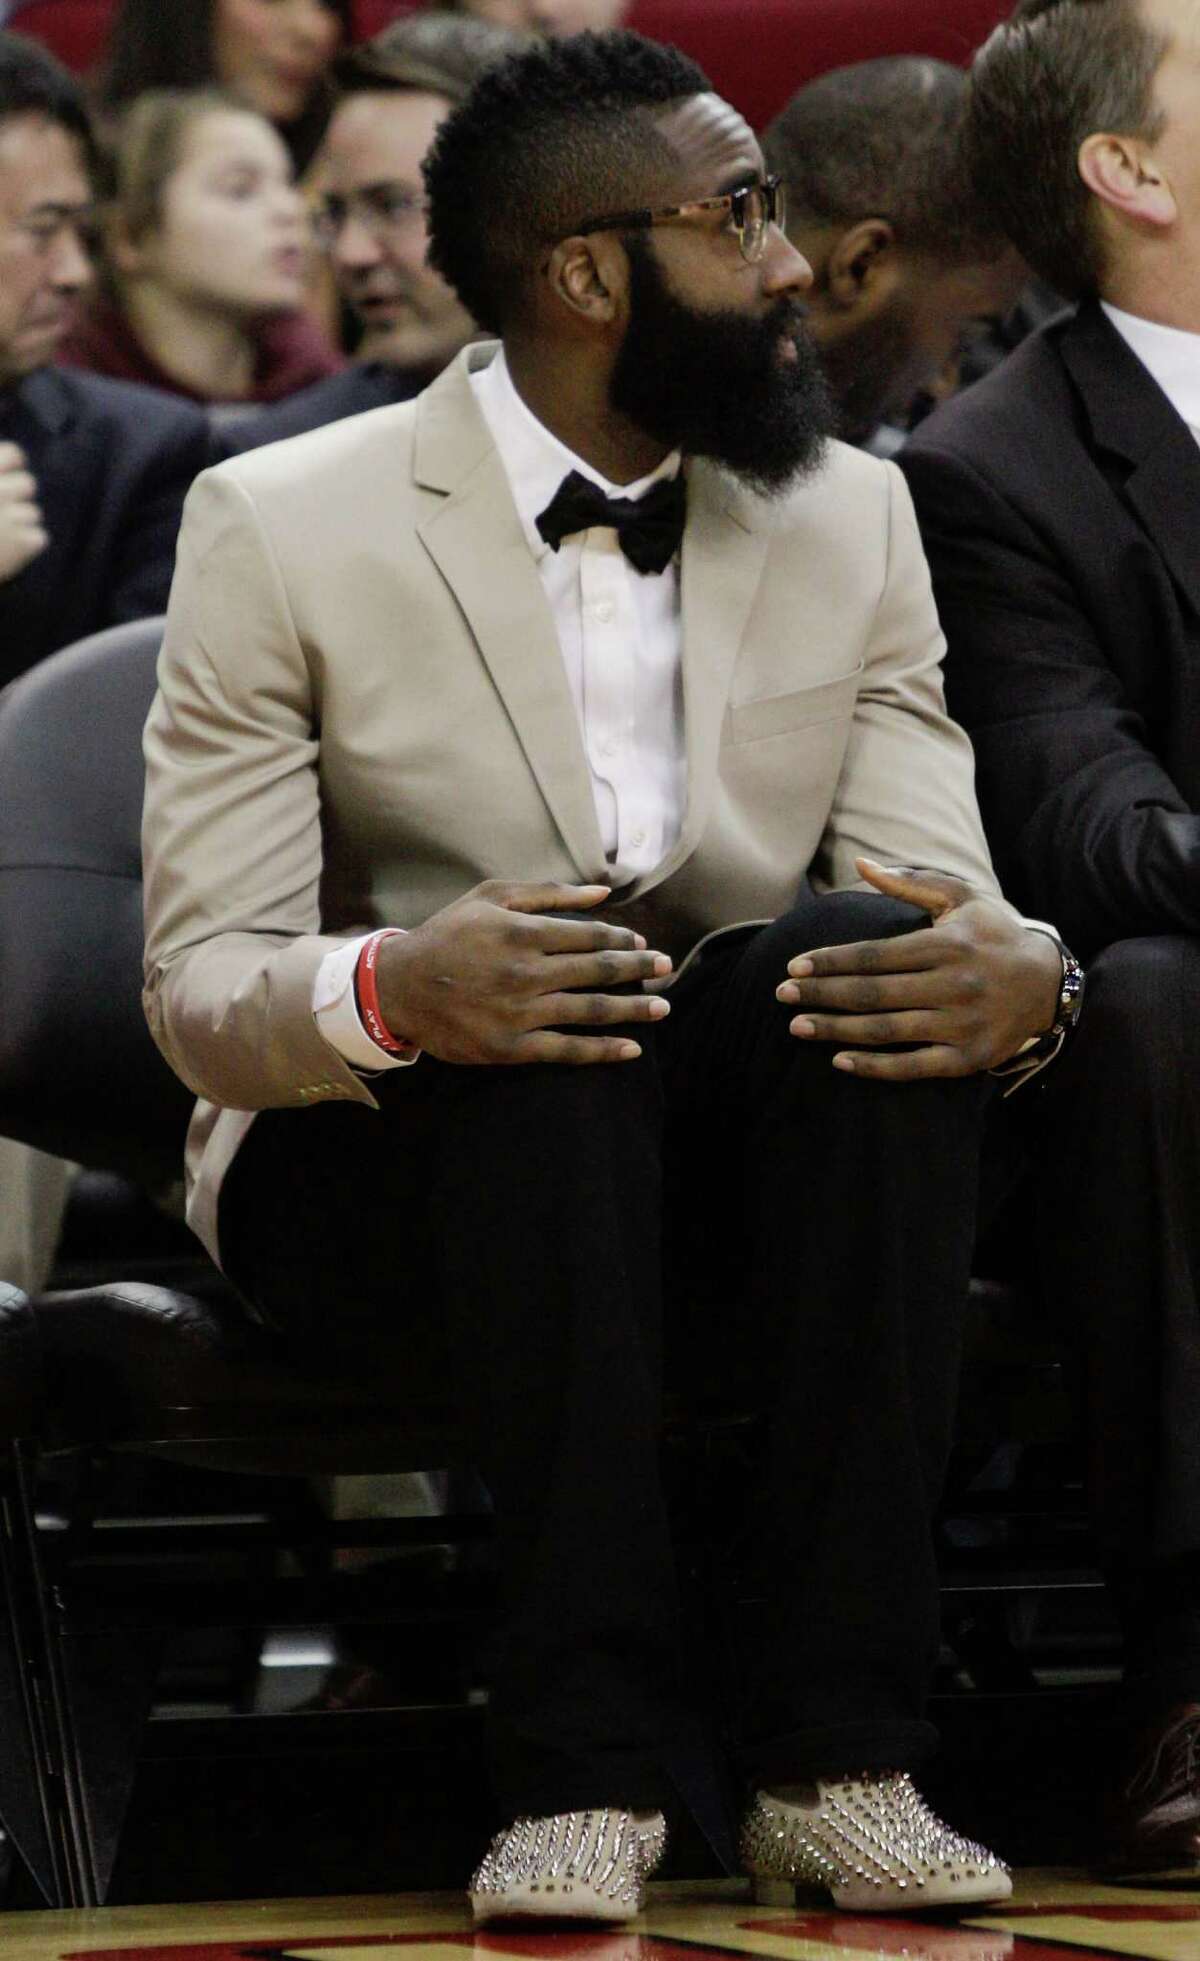 Fit Check: What did James Harden wear into the arena each night he